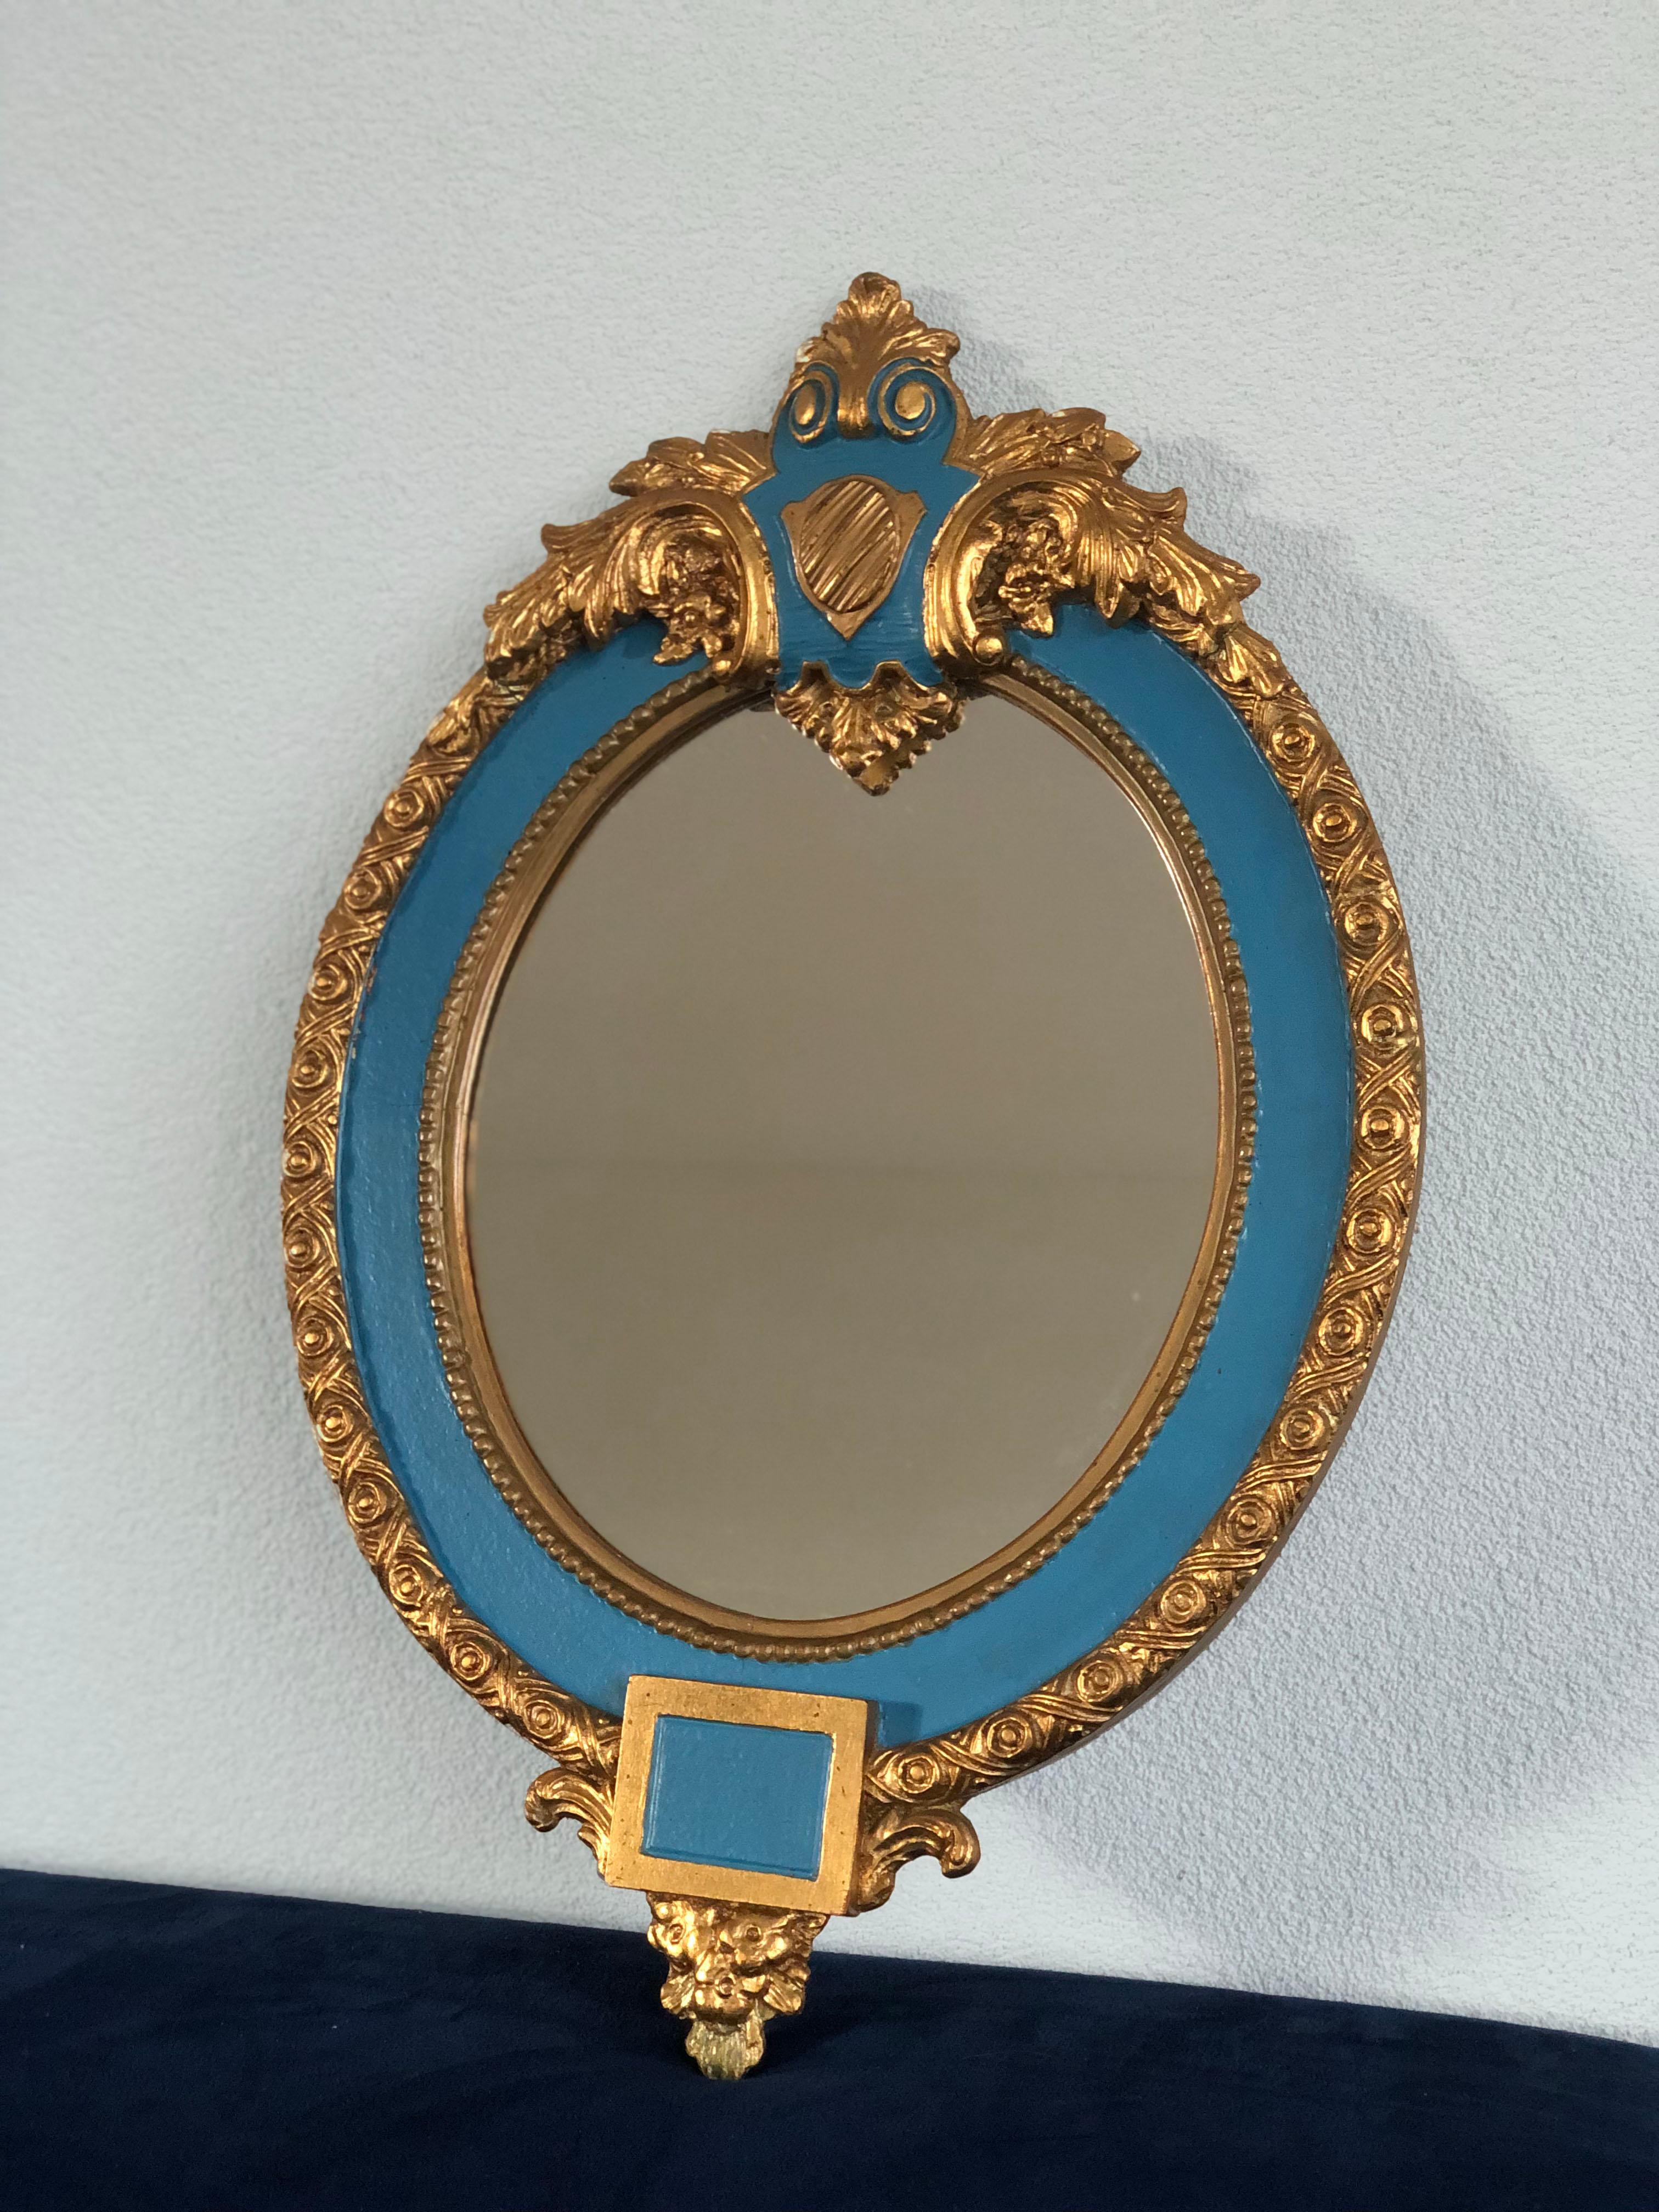 2 beautiful, very detailed oval giltwood crested mirrors from France. The frame of the carved wood is decorated with a floral and pearl rim. The plaster of the crest is finished with leaves and the whole mirror with a blue line of a later